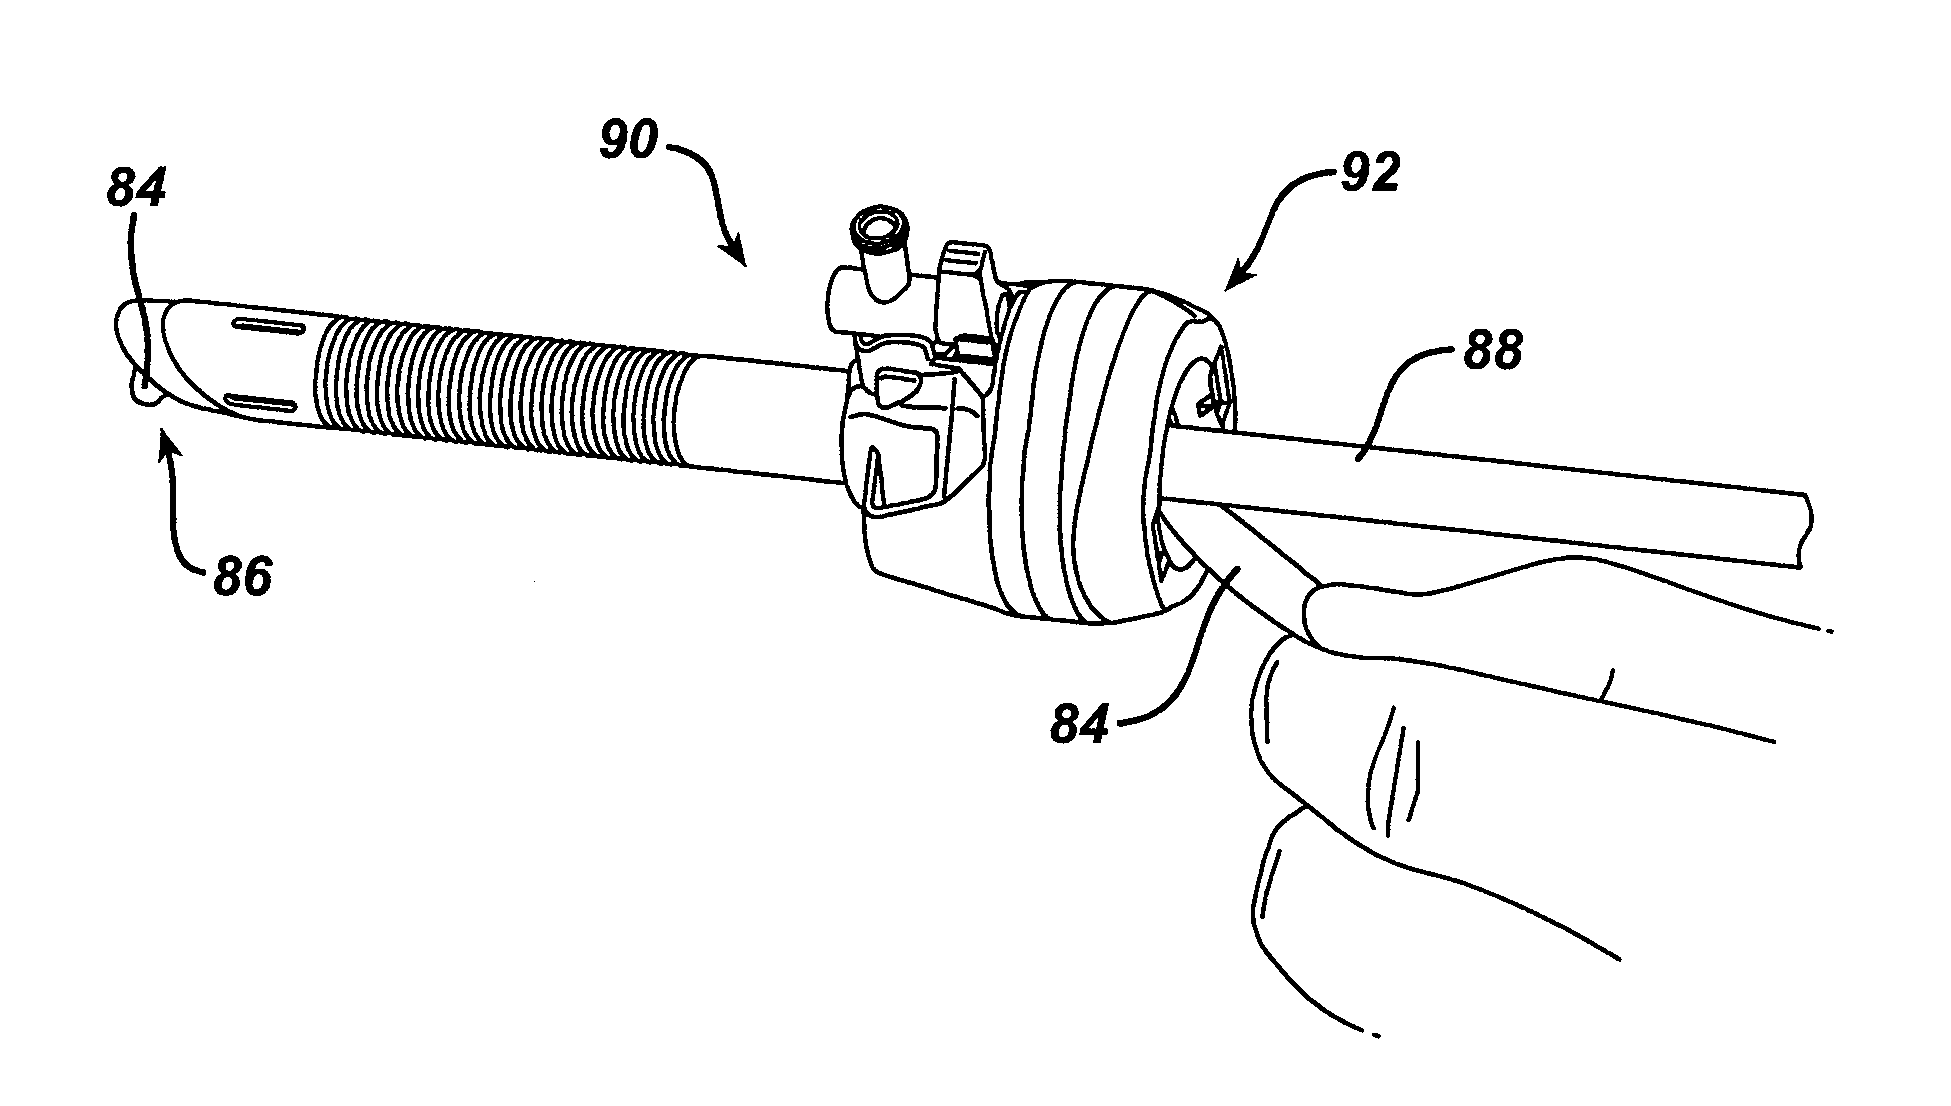 Methods and devices for maintaining visibility during surgical procedures